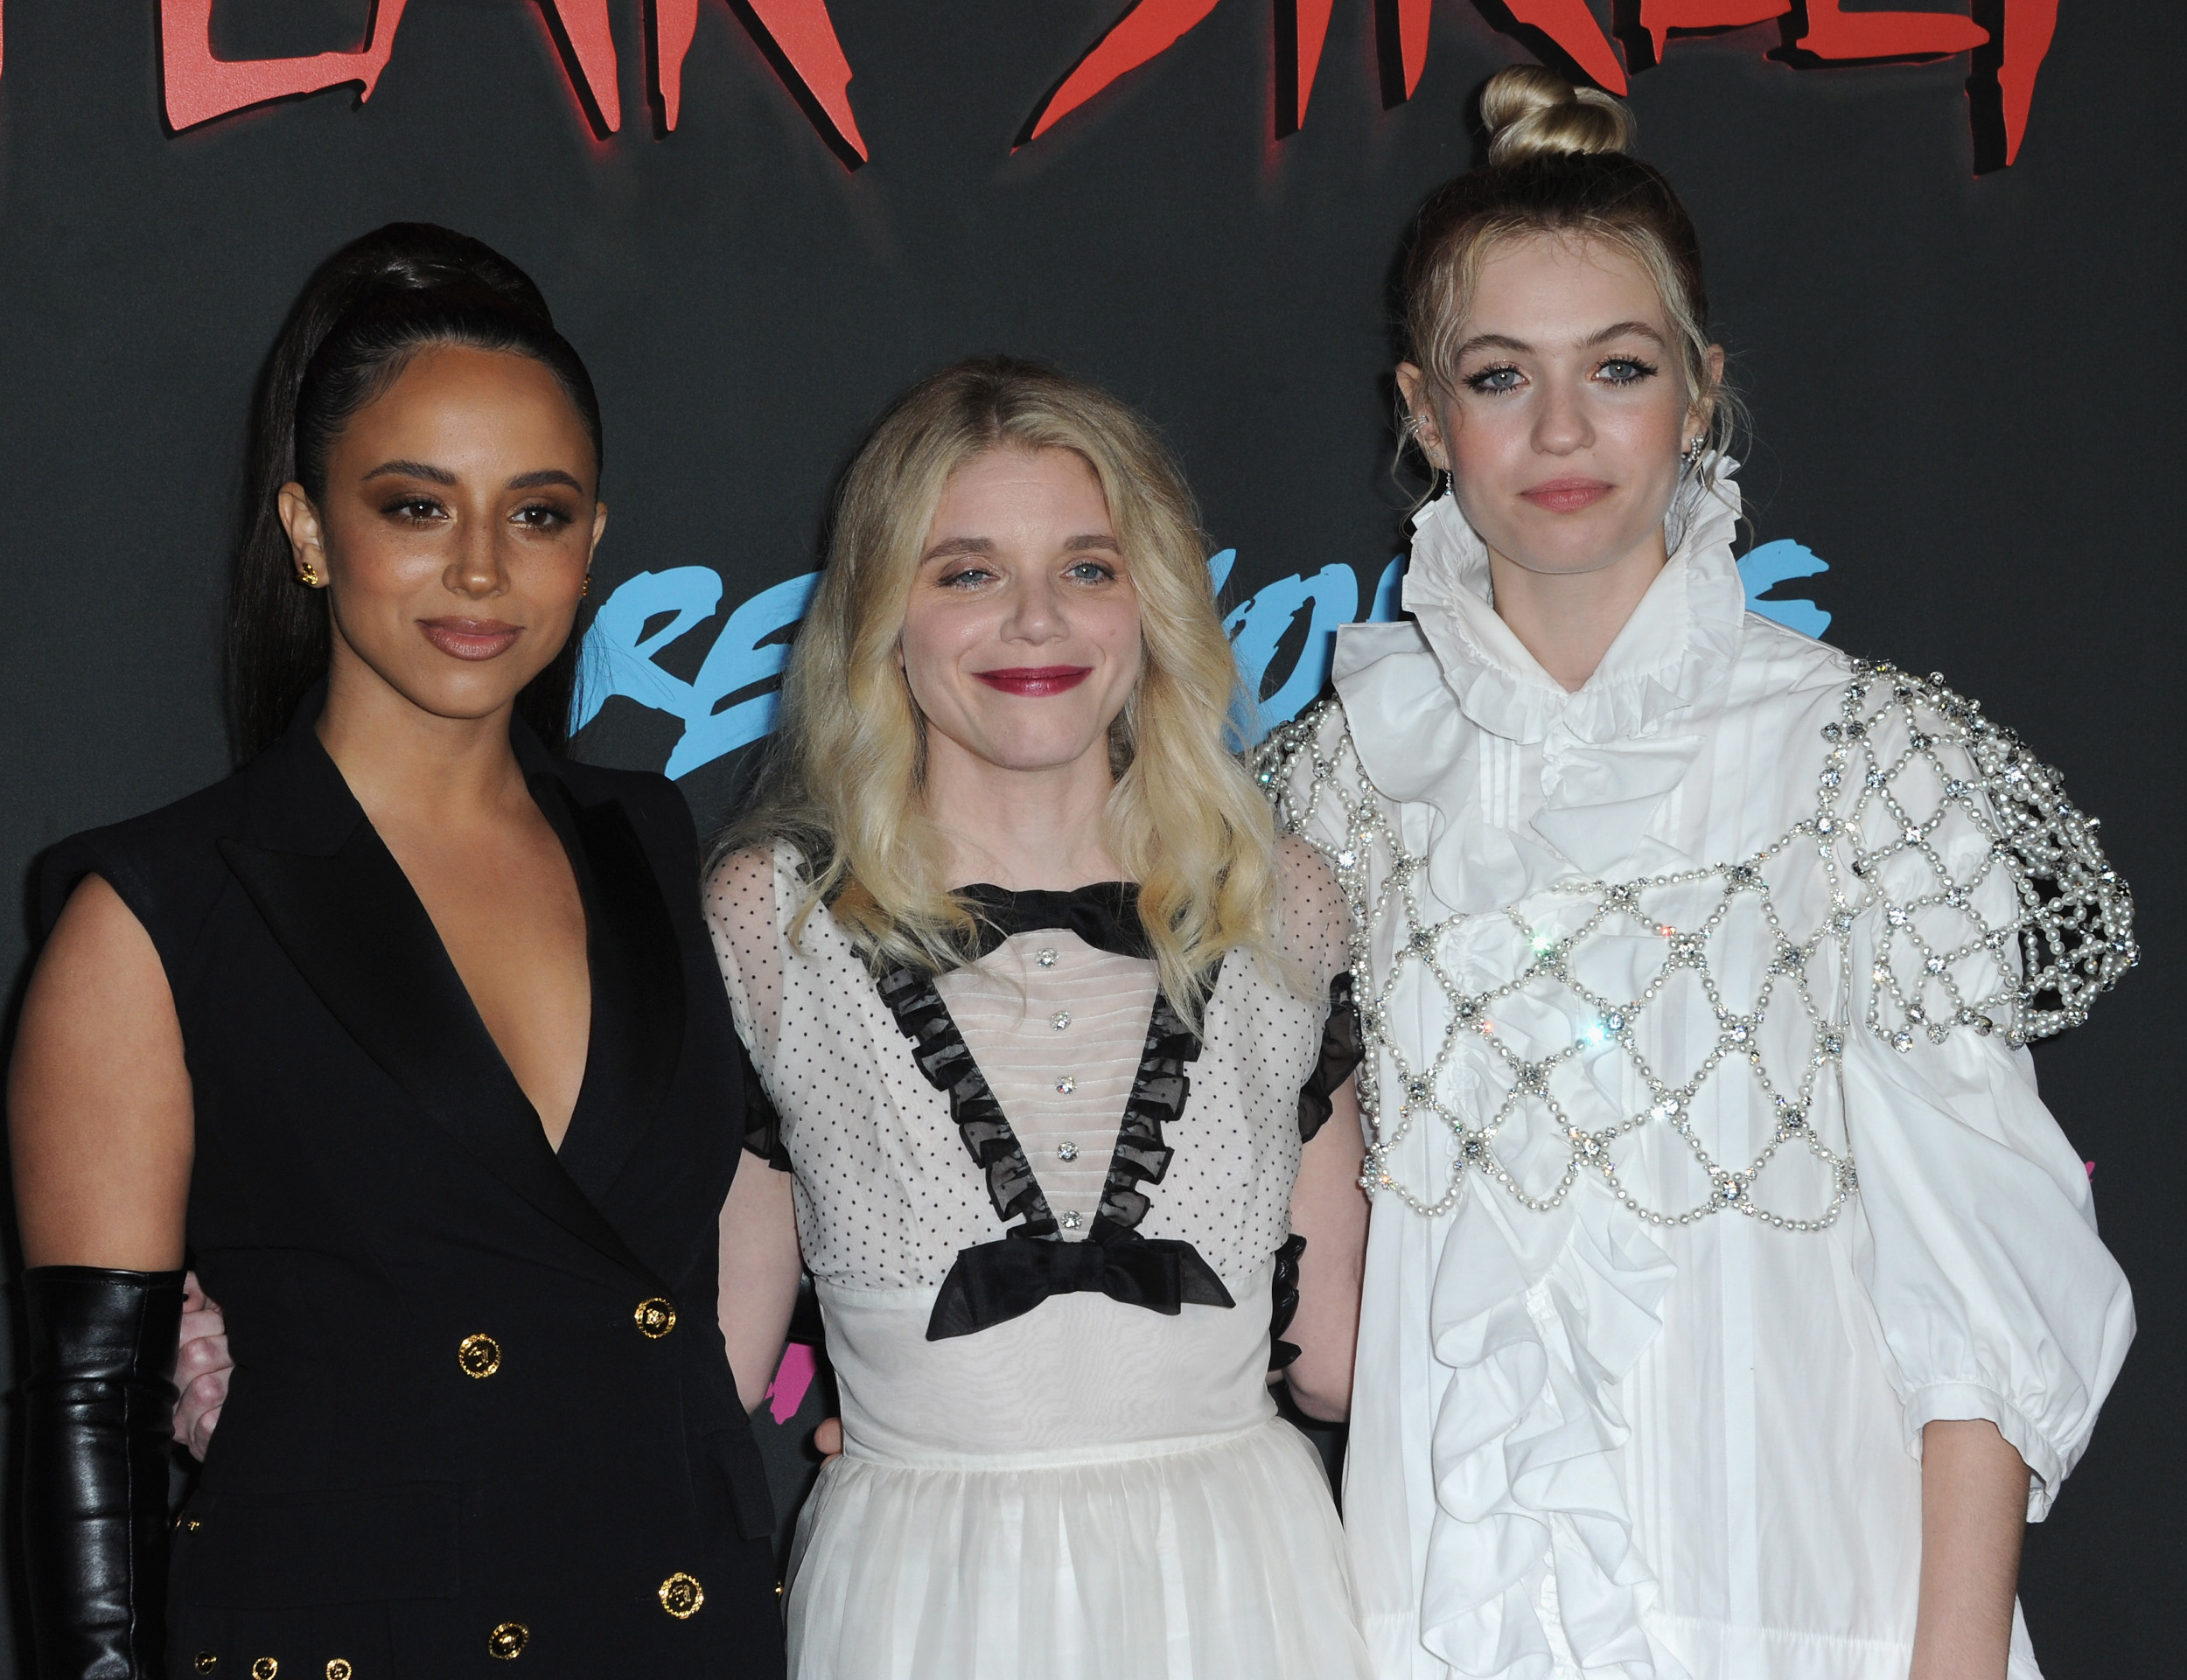 Kiana Madeira, Leigh Janiak, and Olivia Scott Welch wearing formal dresses at the Netflix premiere for the 'Fear Street' trilogy